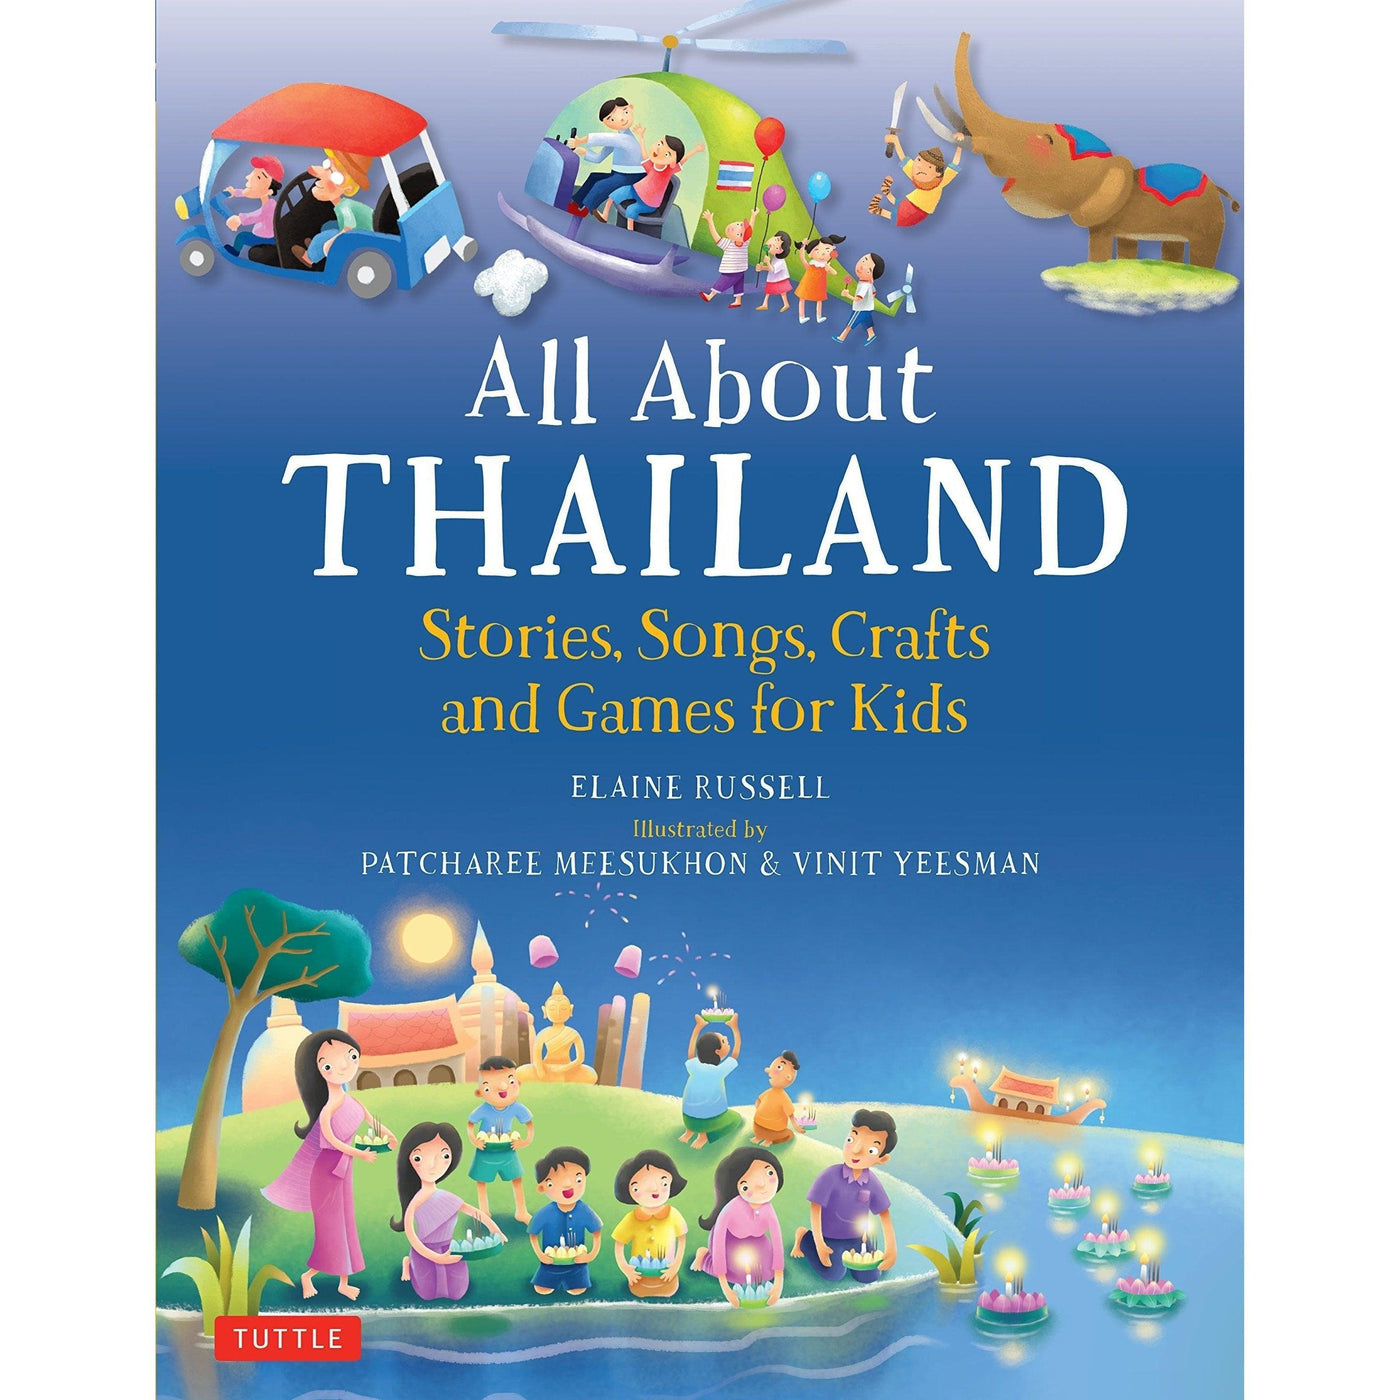 All About Thailand: Stories, Songs, Crafts And Games For Kids